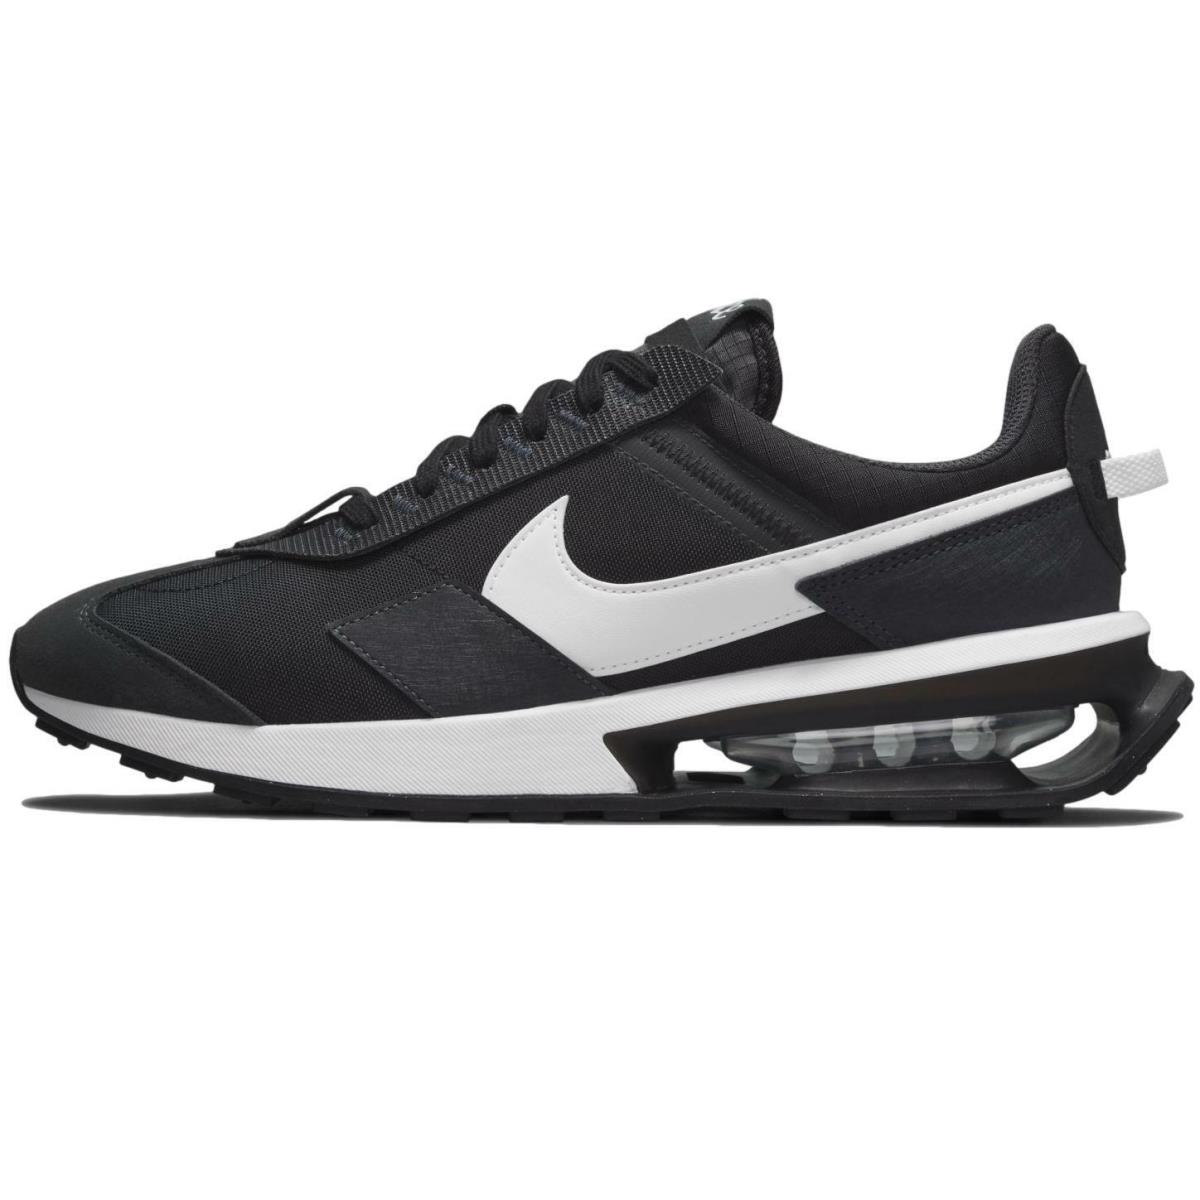 Nike shoes Air - Black/White-Anthracite 0